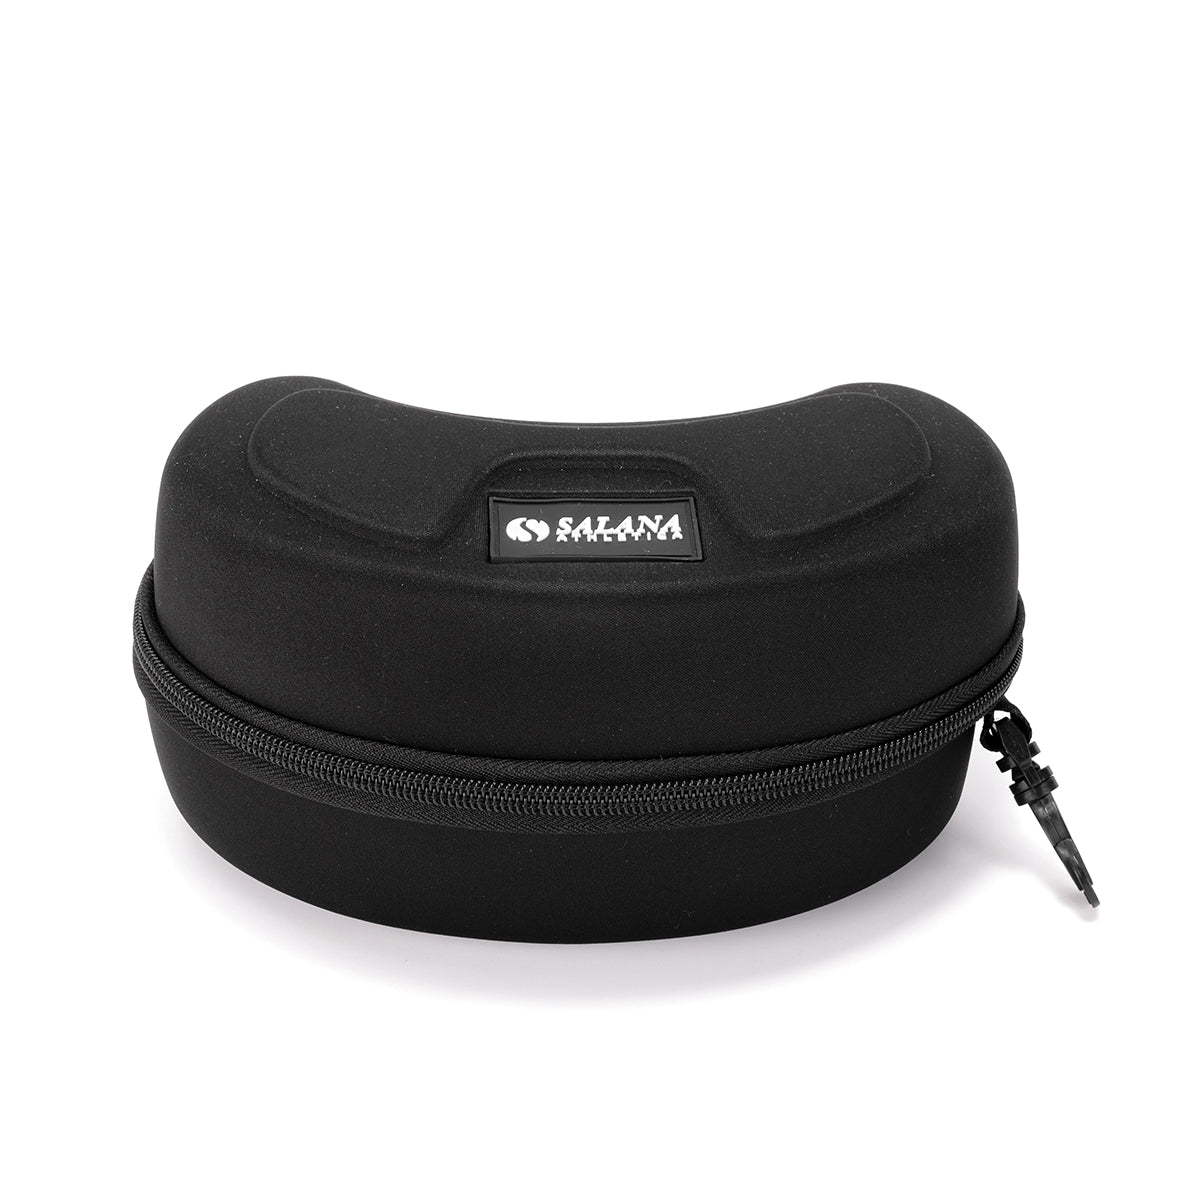 Protective ski goggle case with zip